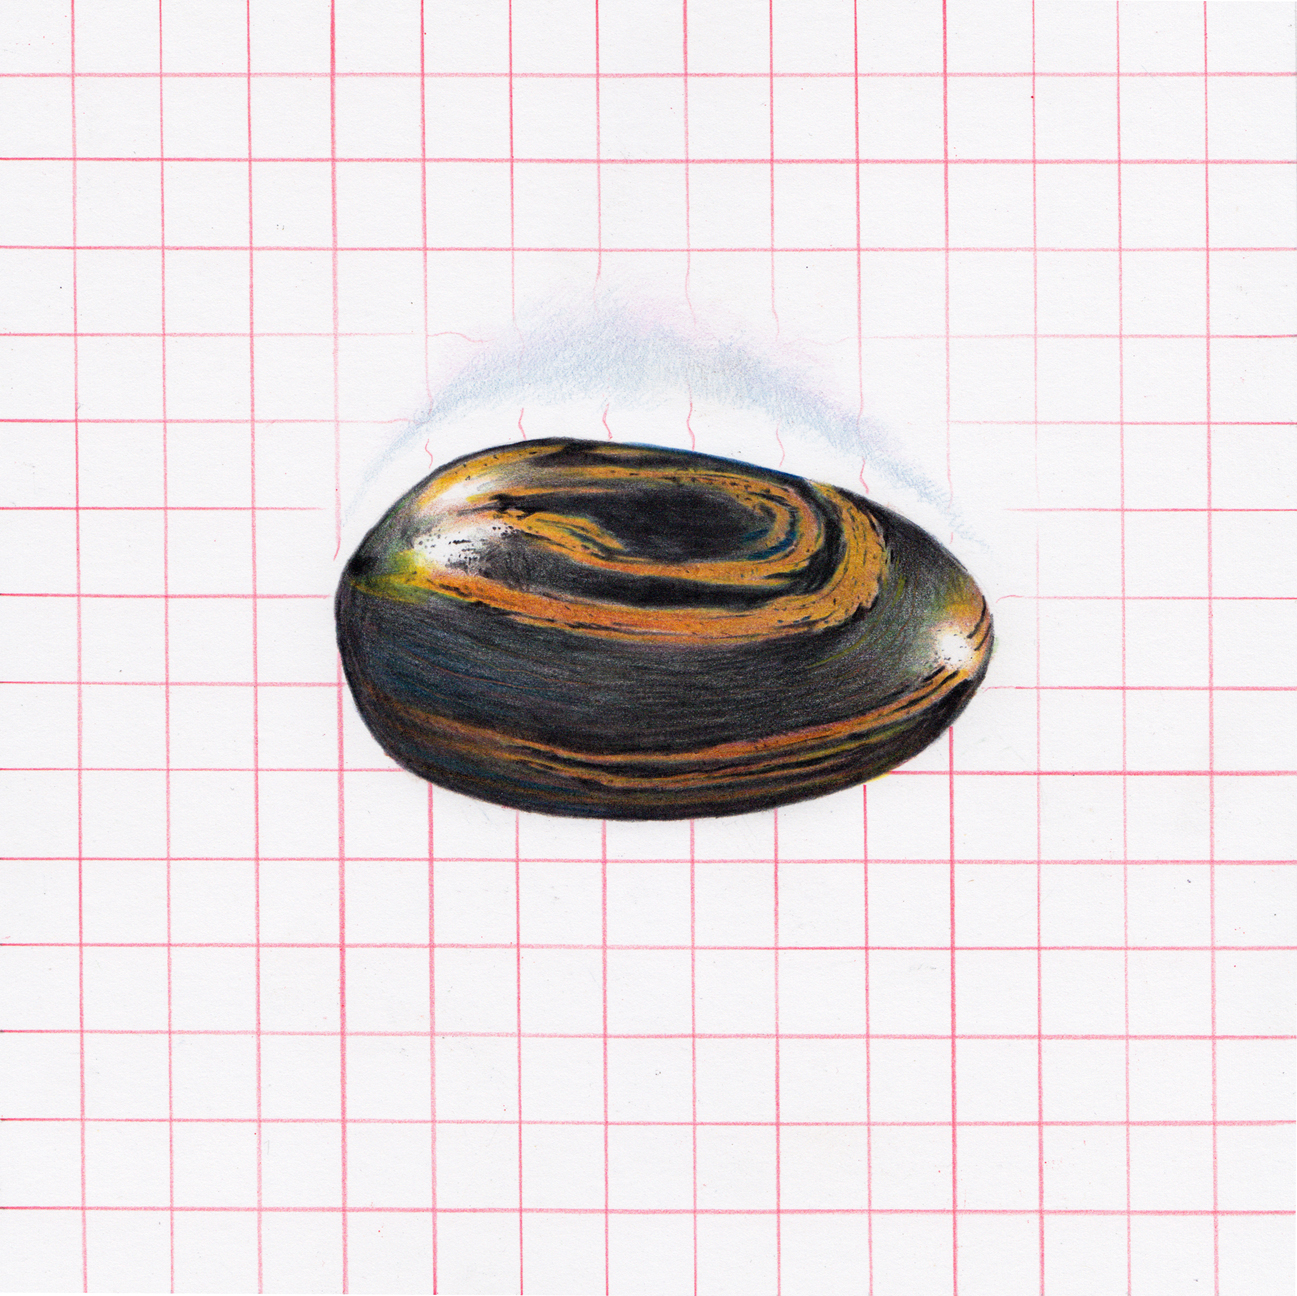 Seer Stone, 7.5" x 7.5", colored pencil on paper